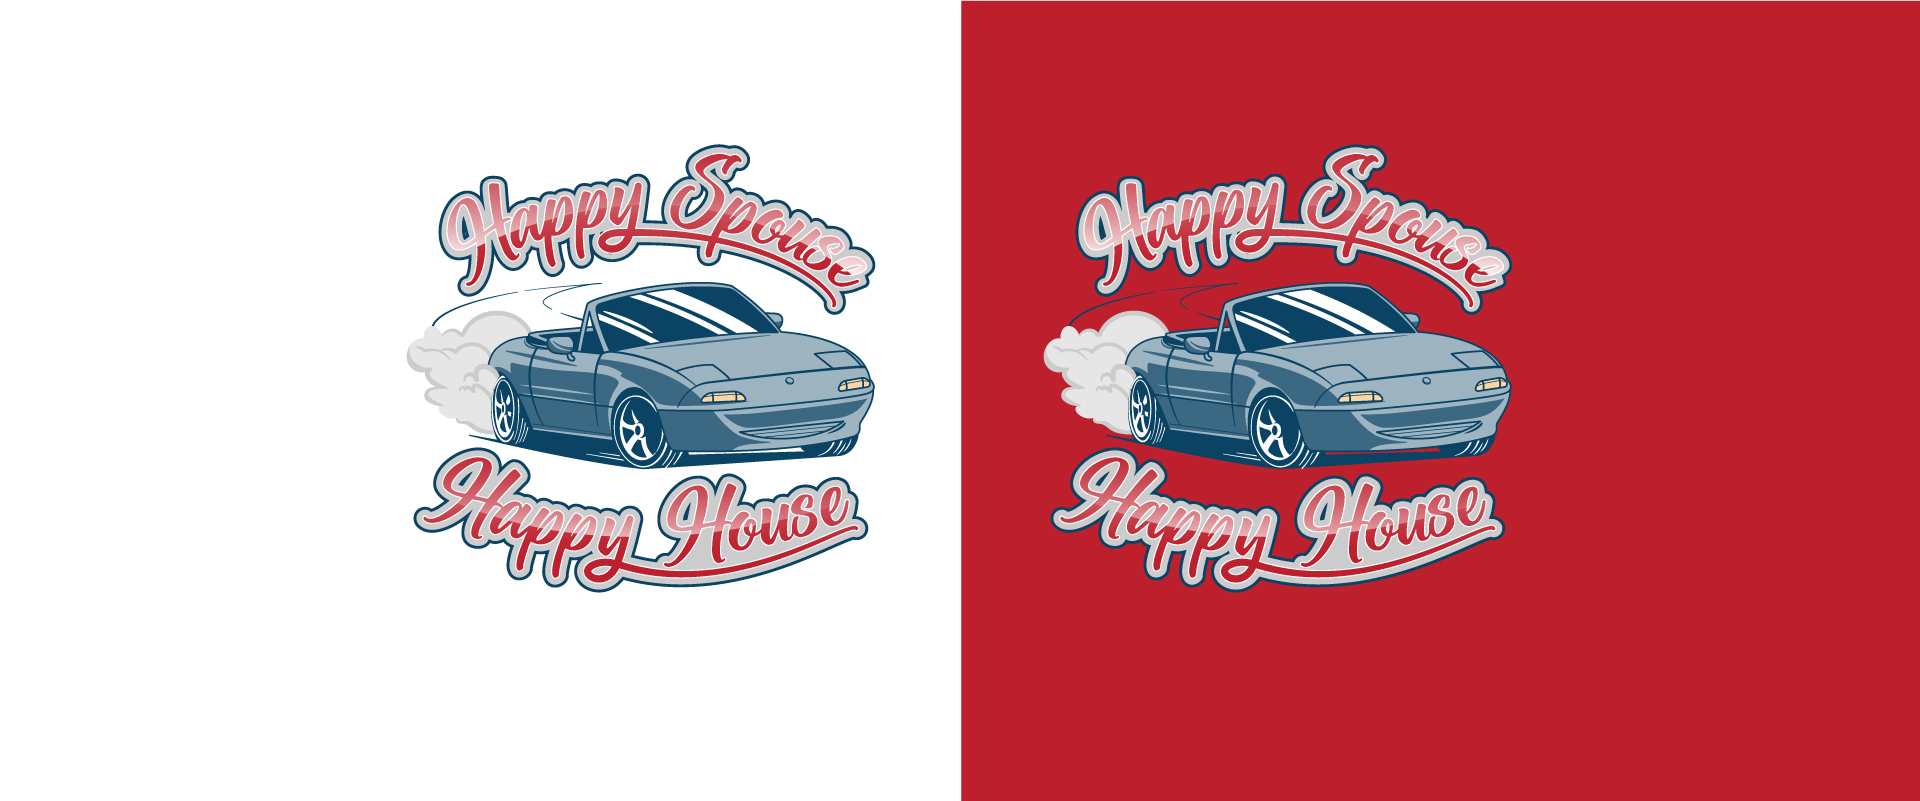 Image showing illustration for a t-shirt design that says 'Happy Spouse, Happy House' with a Car speeding illustration in the centre of the design